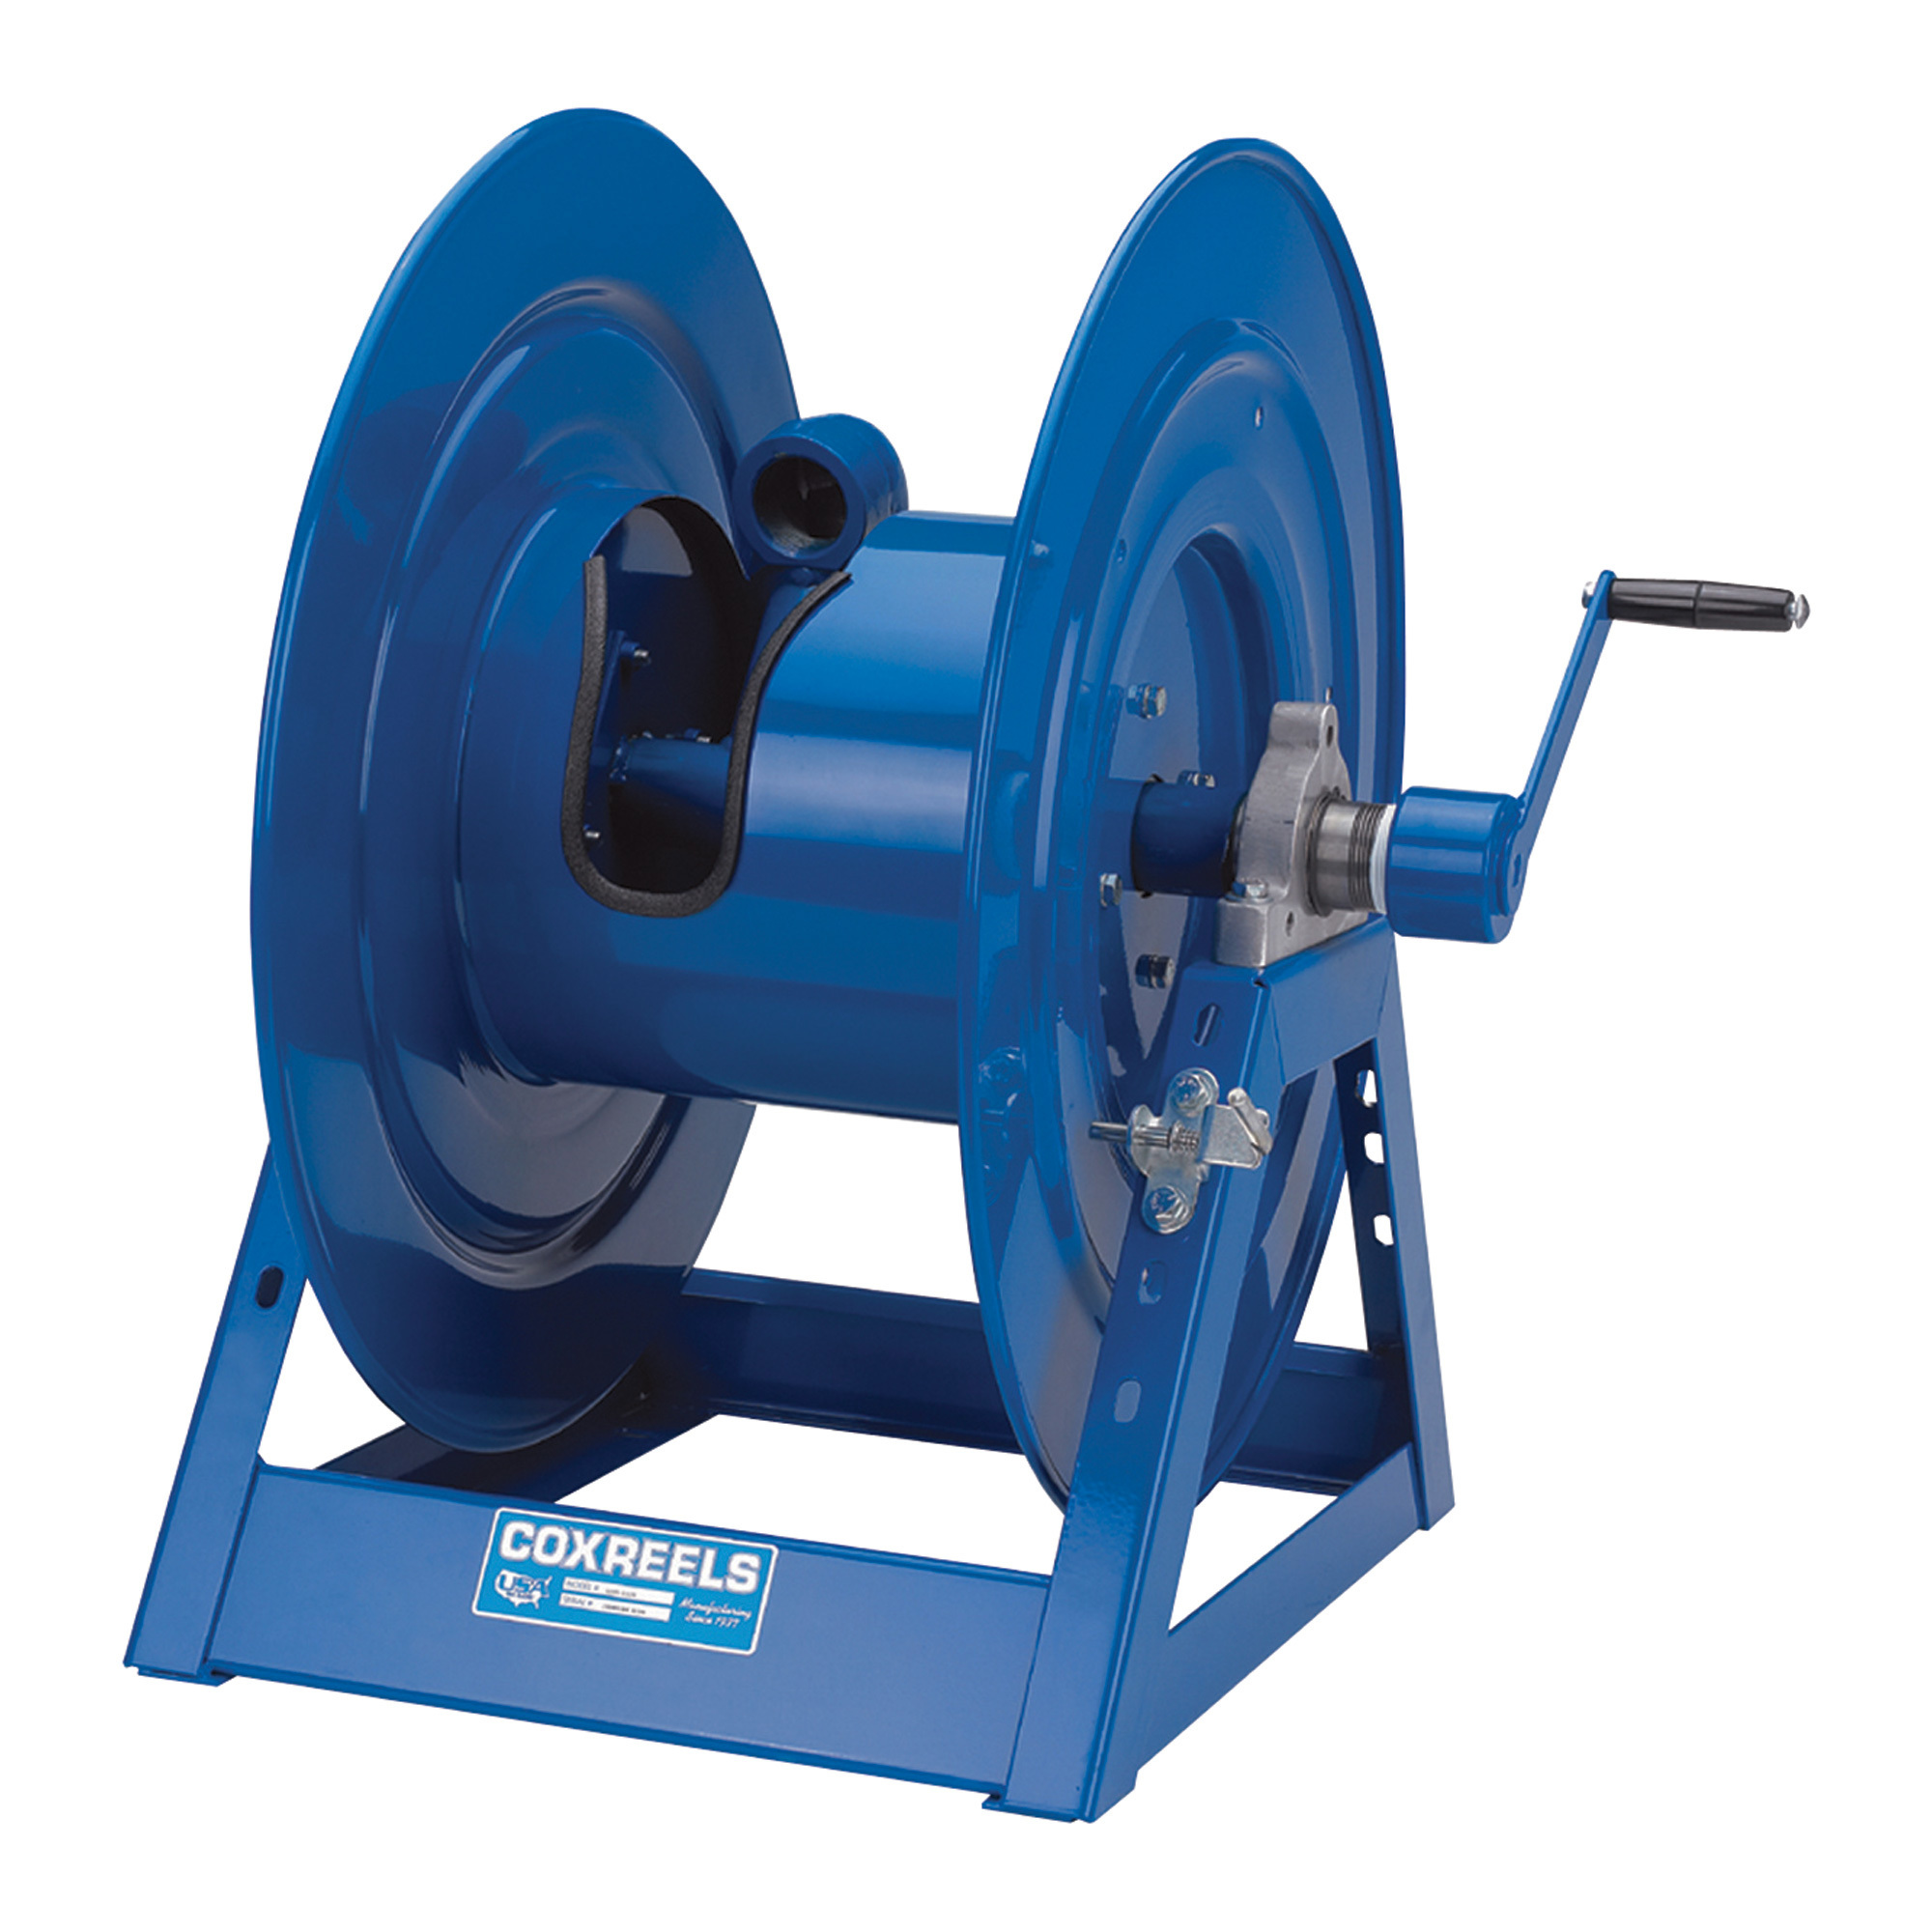 Coxreels 1185 Series Large-Capacity Hose Reel, Holds 1 1/2in. x 100ft.  Hose, Max. 600 PSI, Model# 1185-2024